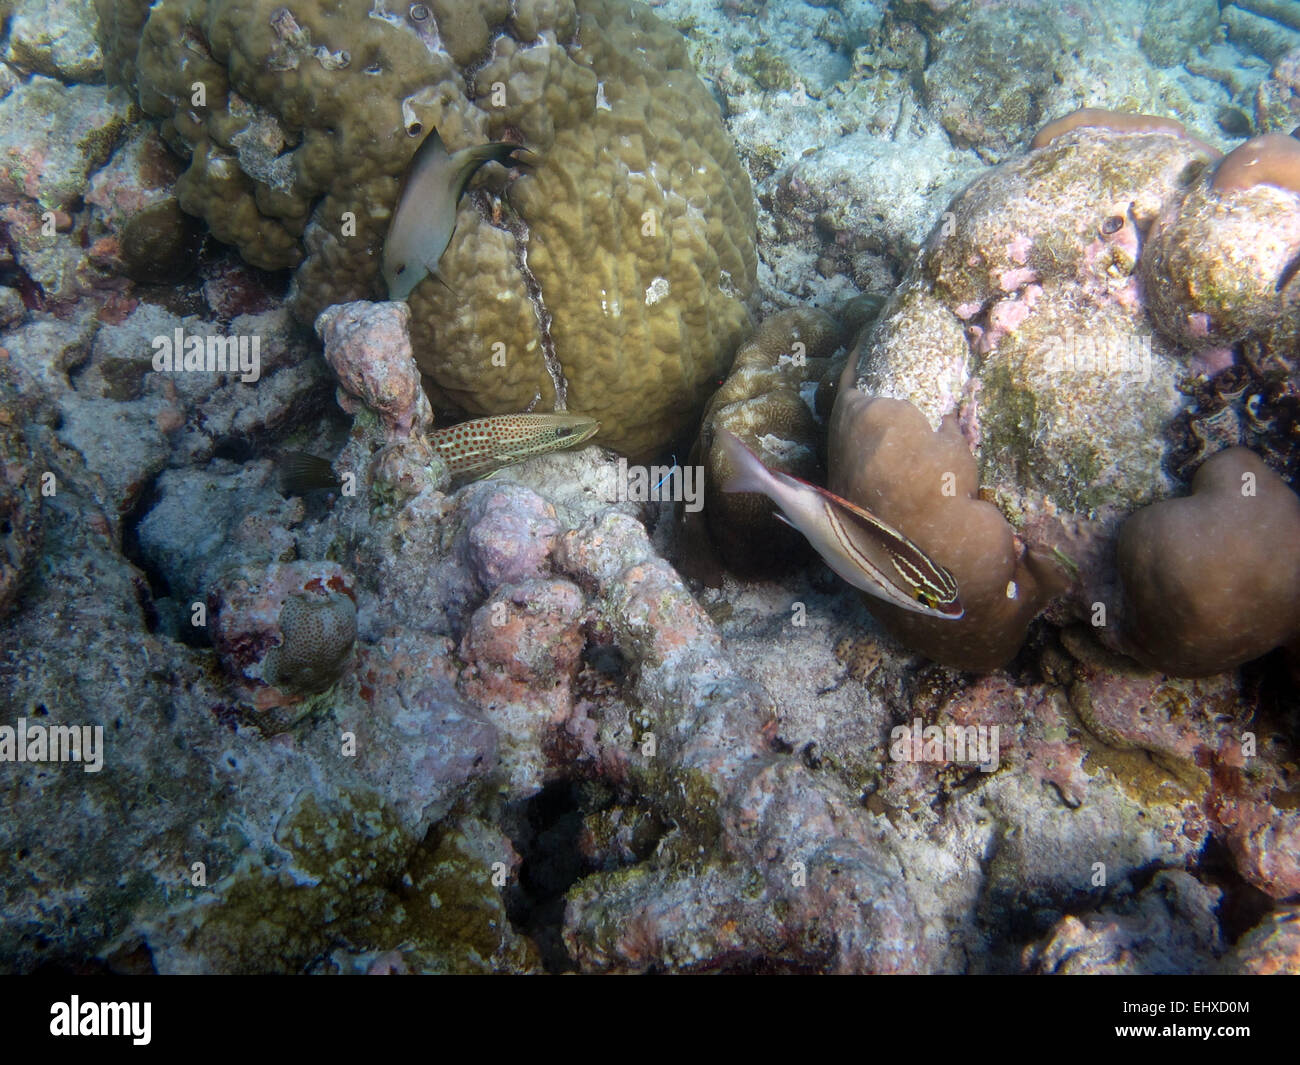 Lined Bristletooth Surgeonfish, Slender Grouper, Sabretooth Blenny, and Cardinalfish on a coral reef in the Maldives Stock Photo